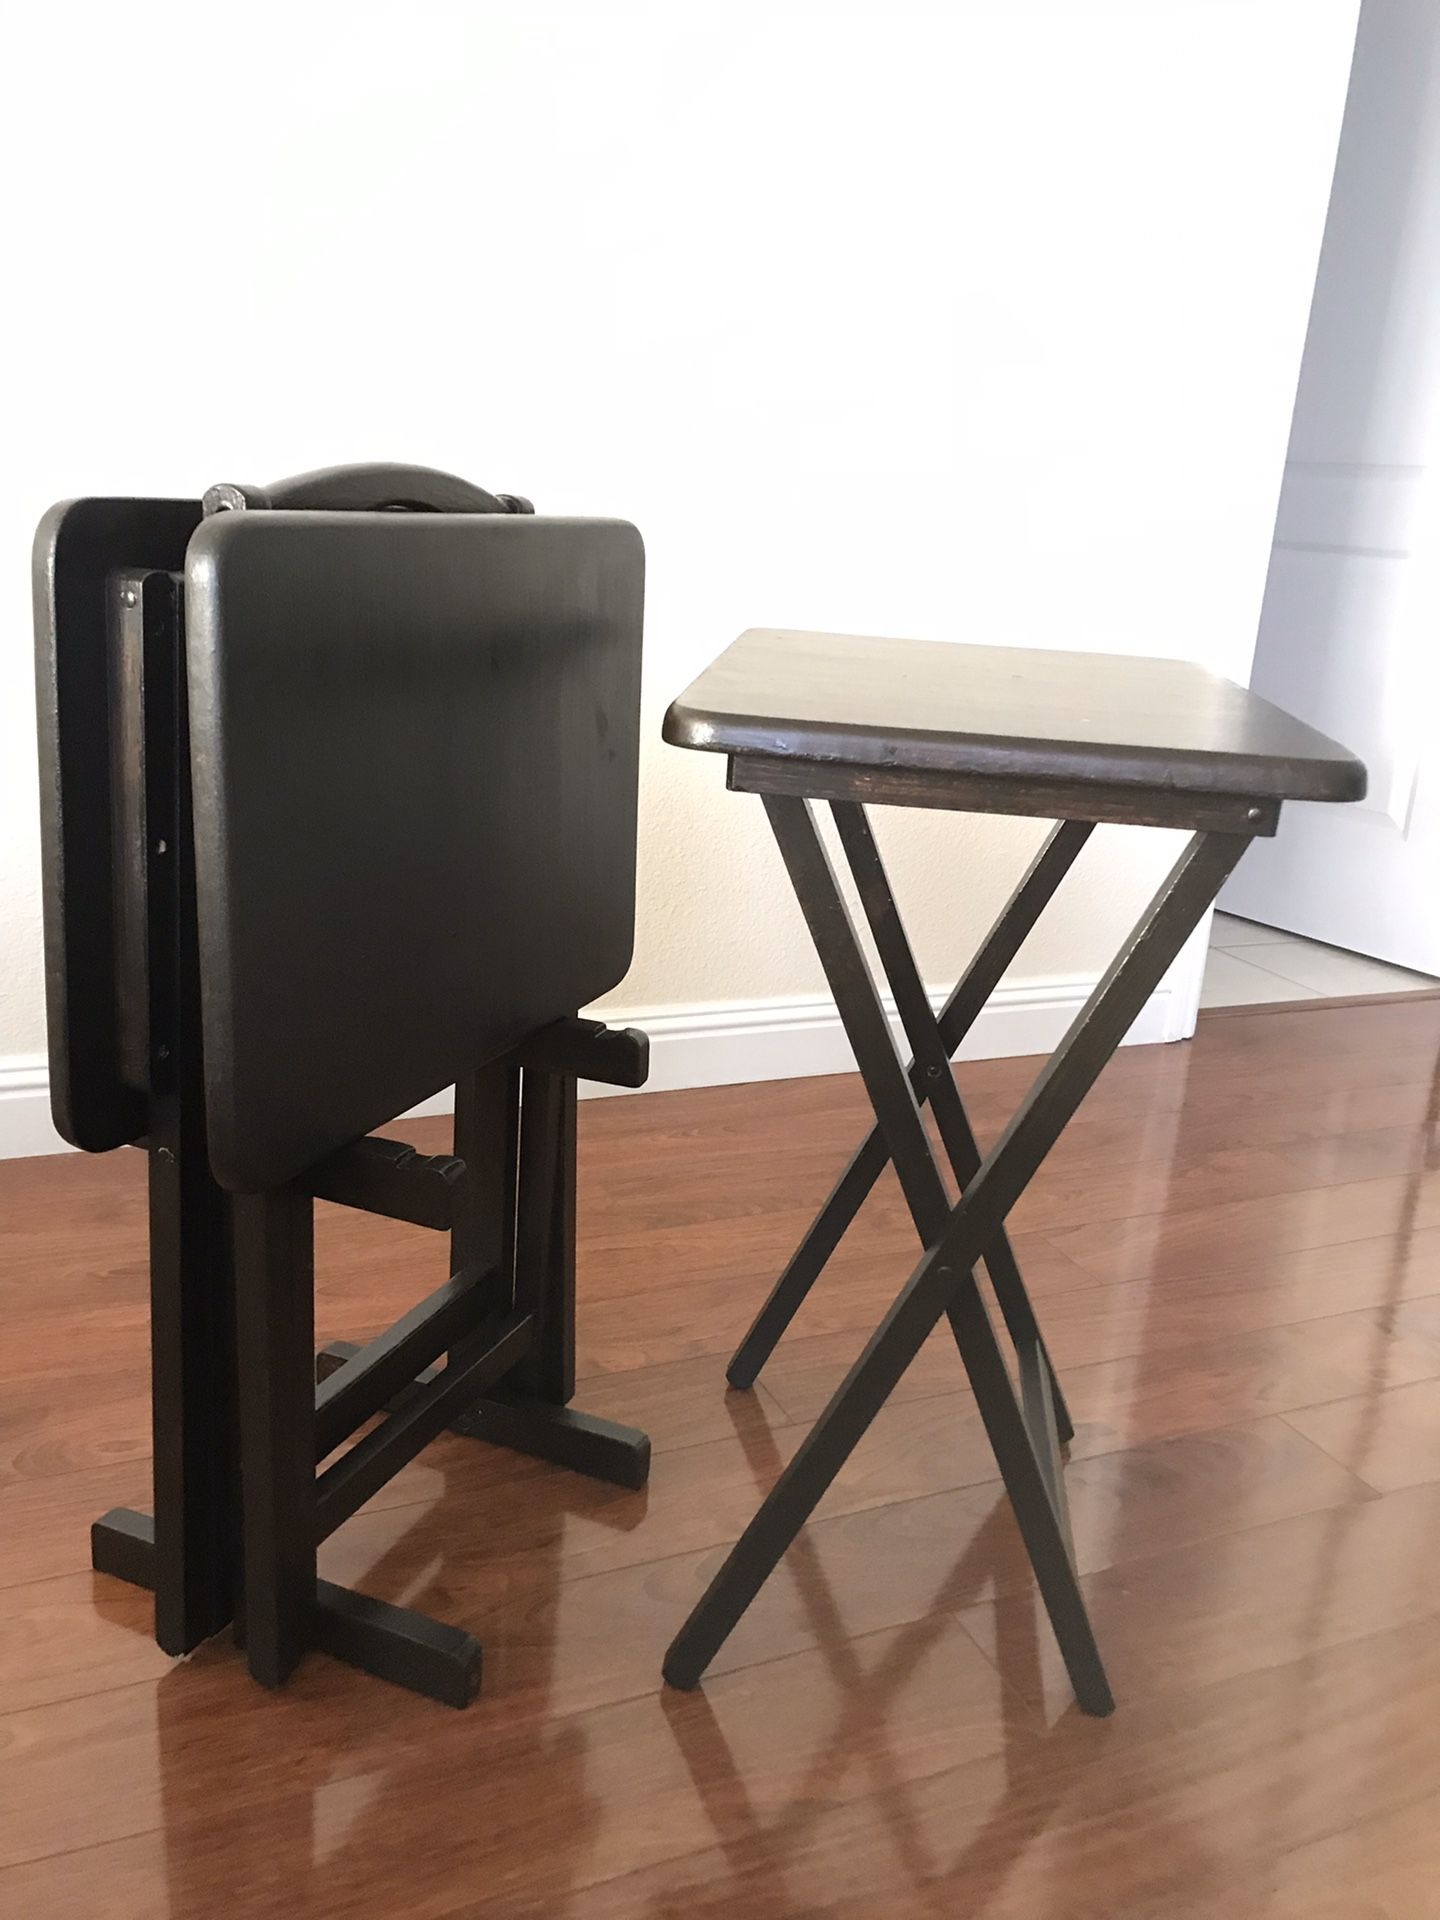 Table with stand